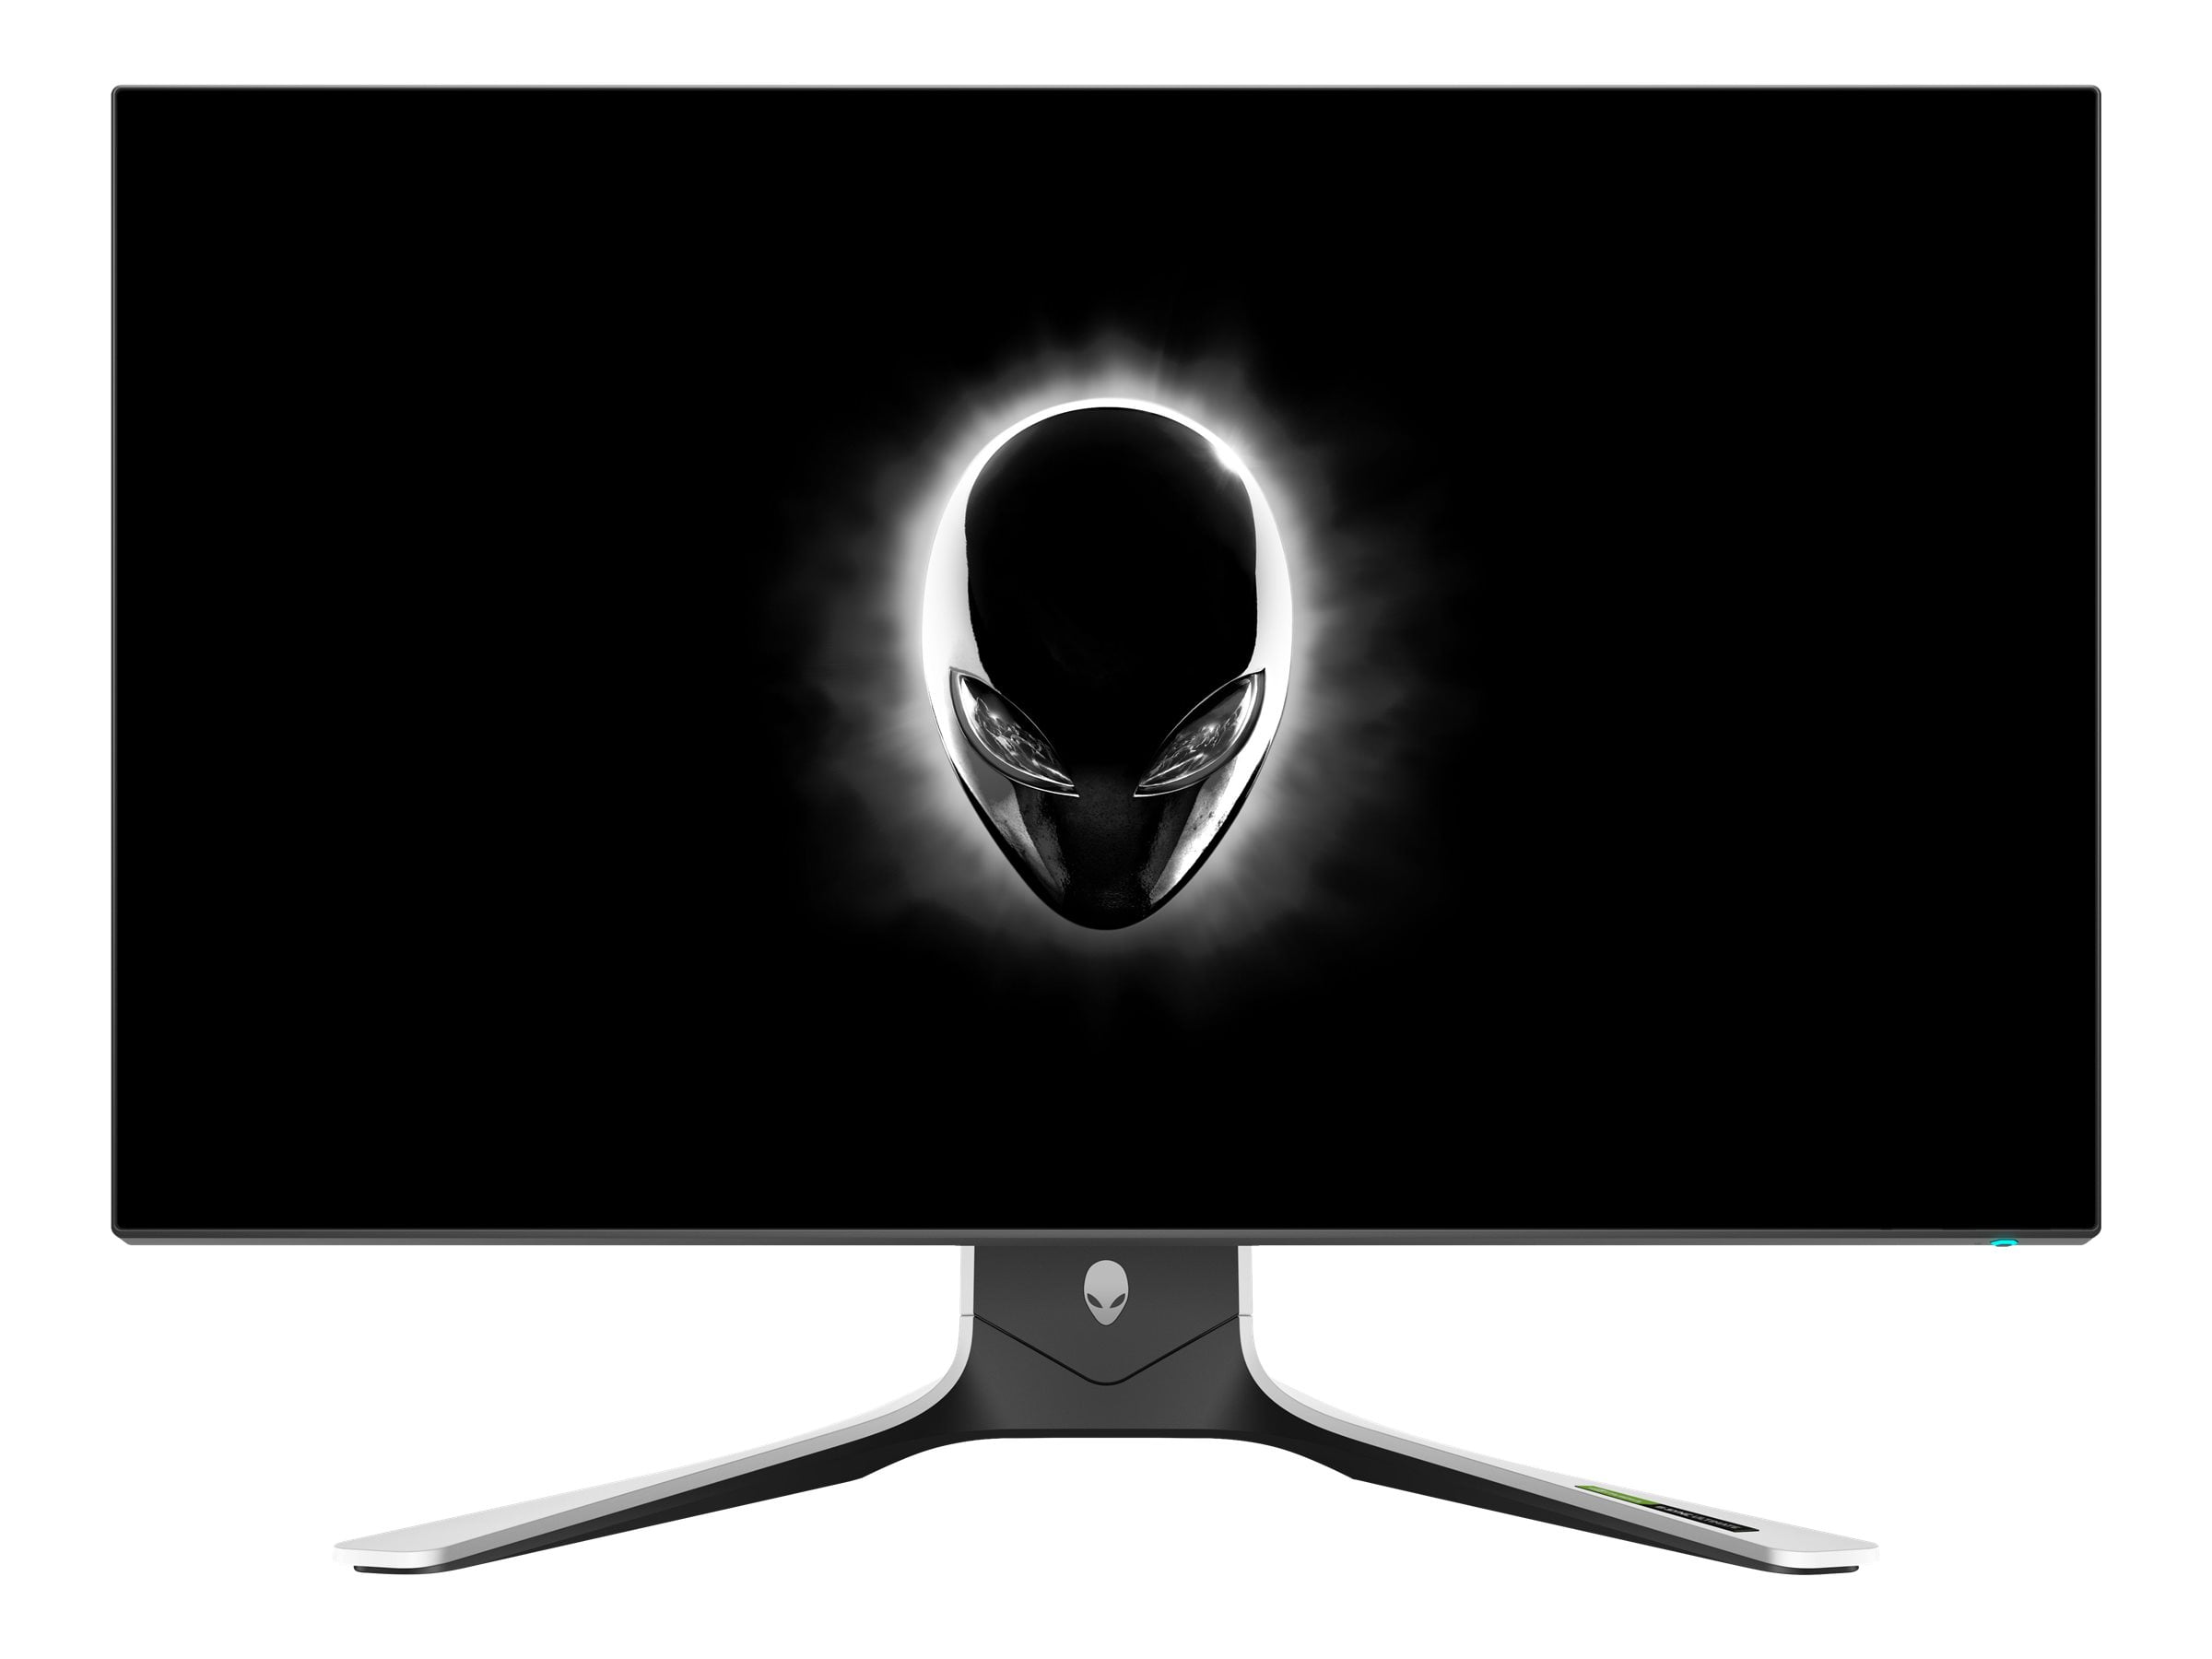 access dual exhibition Alienware AW2721D - LED monitor - 27" - 2560 x 1440 QHD @ 240 Hz - Fast IPS  - 600 cd/m������ - 1000:1 - DisplayHDR 600 - 1 ms - 2xHDMI, DisplayPort -  with 3-Years Advanced Exchange Service and Premium Panel Guarantee -  Walmart.com